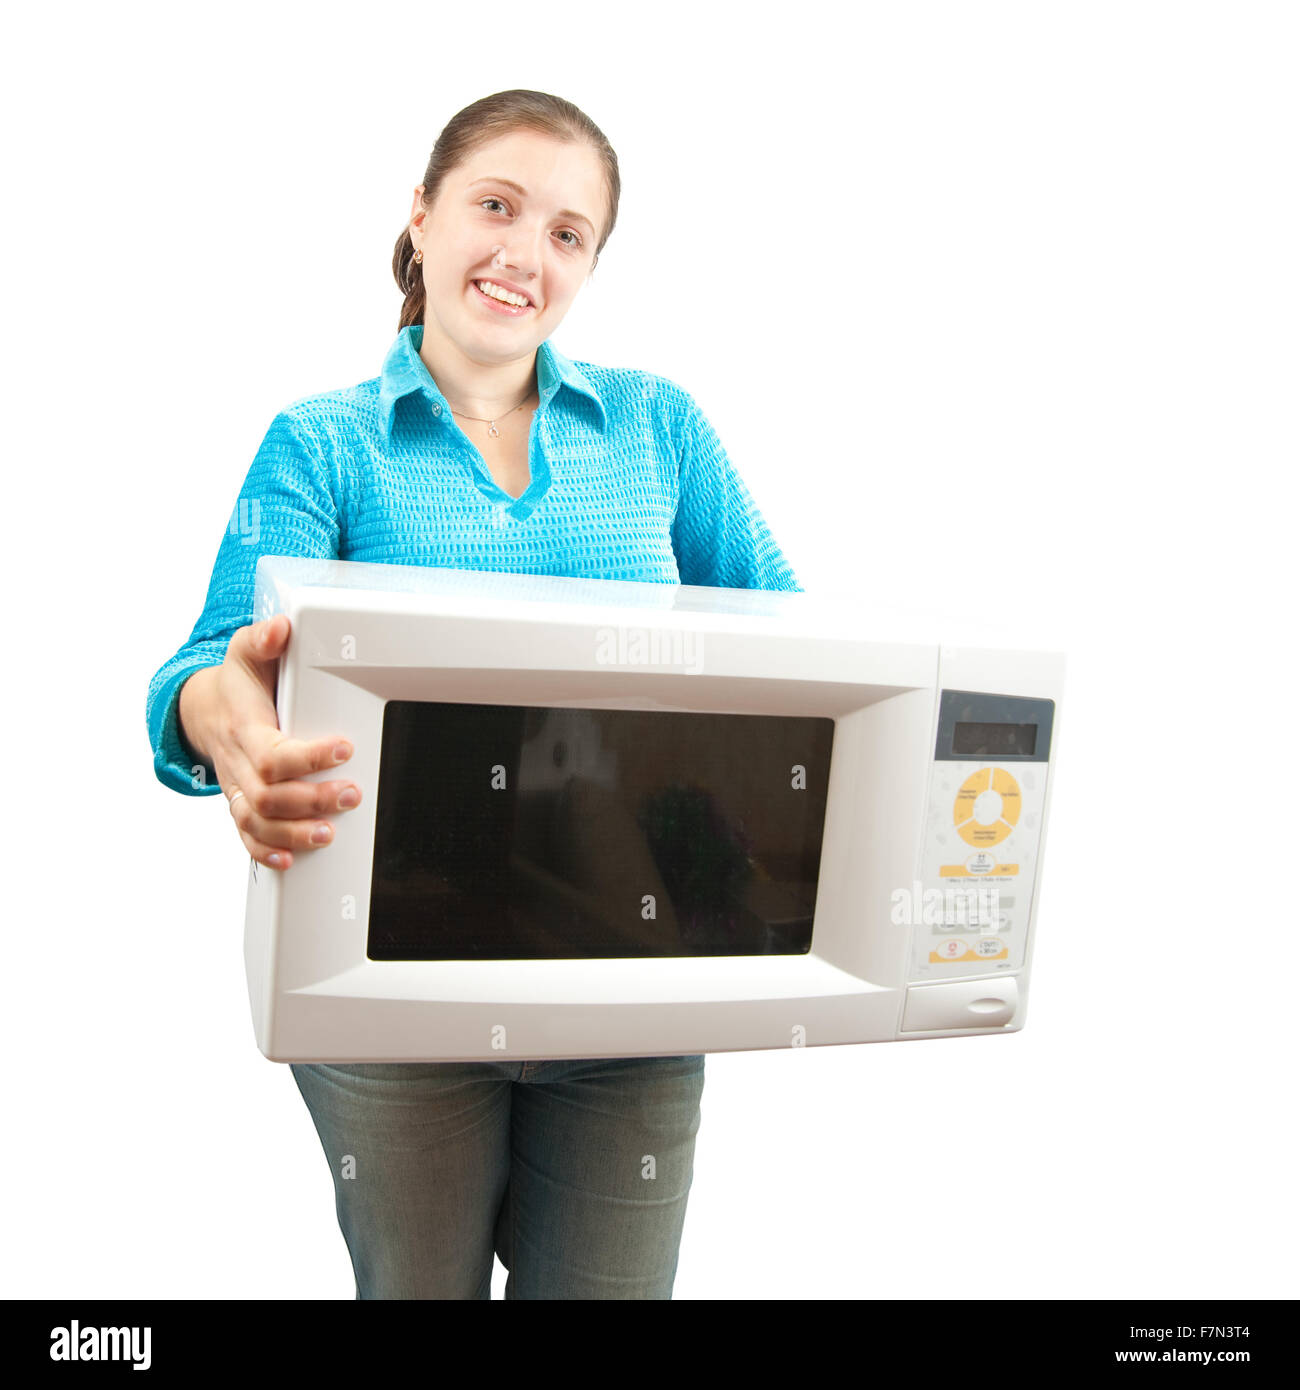 Girl in blue with microwave oven. Isolated over white Stock Photo